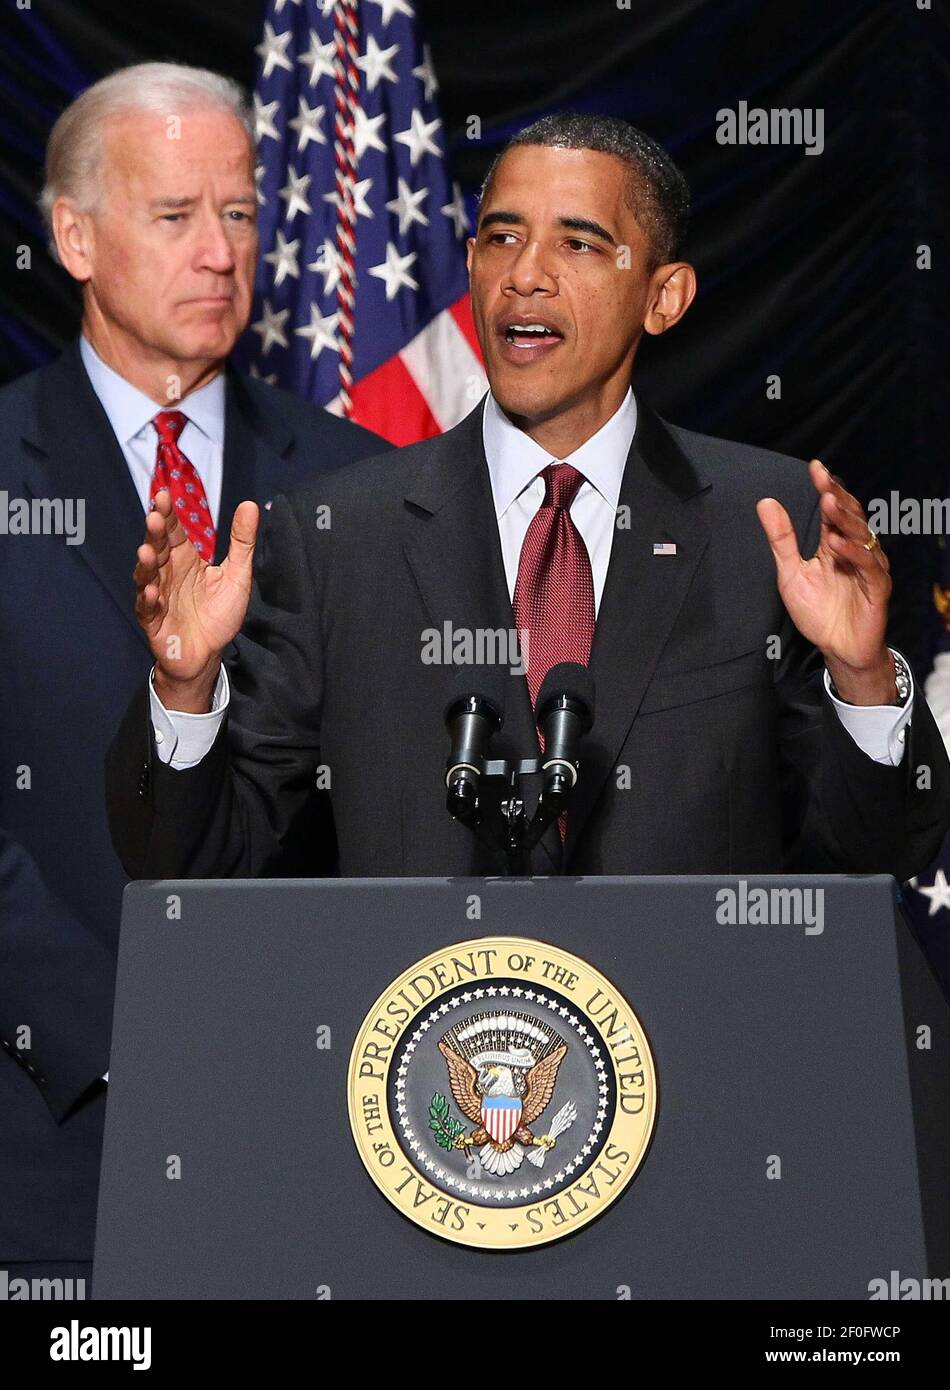 21 July 2010 - Washington, D.C. - U.S. President Barack Obama speaks as Vice President Joe Biden looks on before signing the Dodd-Frank Wall Street Reform and Consumer Protection Act at the Ronald Reagan Building July 21, 2010 in Washington, DC. The bill is the strongest financial reform legislation since the Great Depression and also creates a consumer protection bureau that oversees banks on mortgage lending and credit card practices. Photo Credit: Win McNamee/Pool/Sipa Press/1007211947 Stock Photo